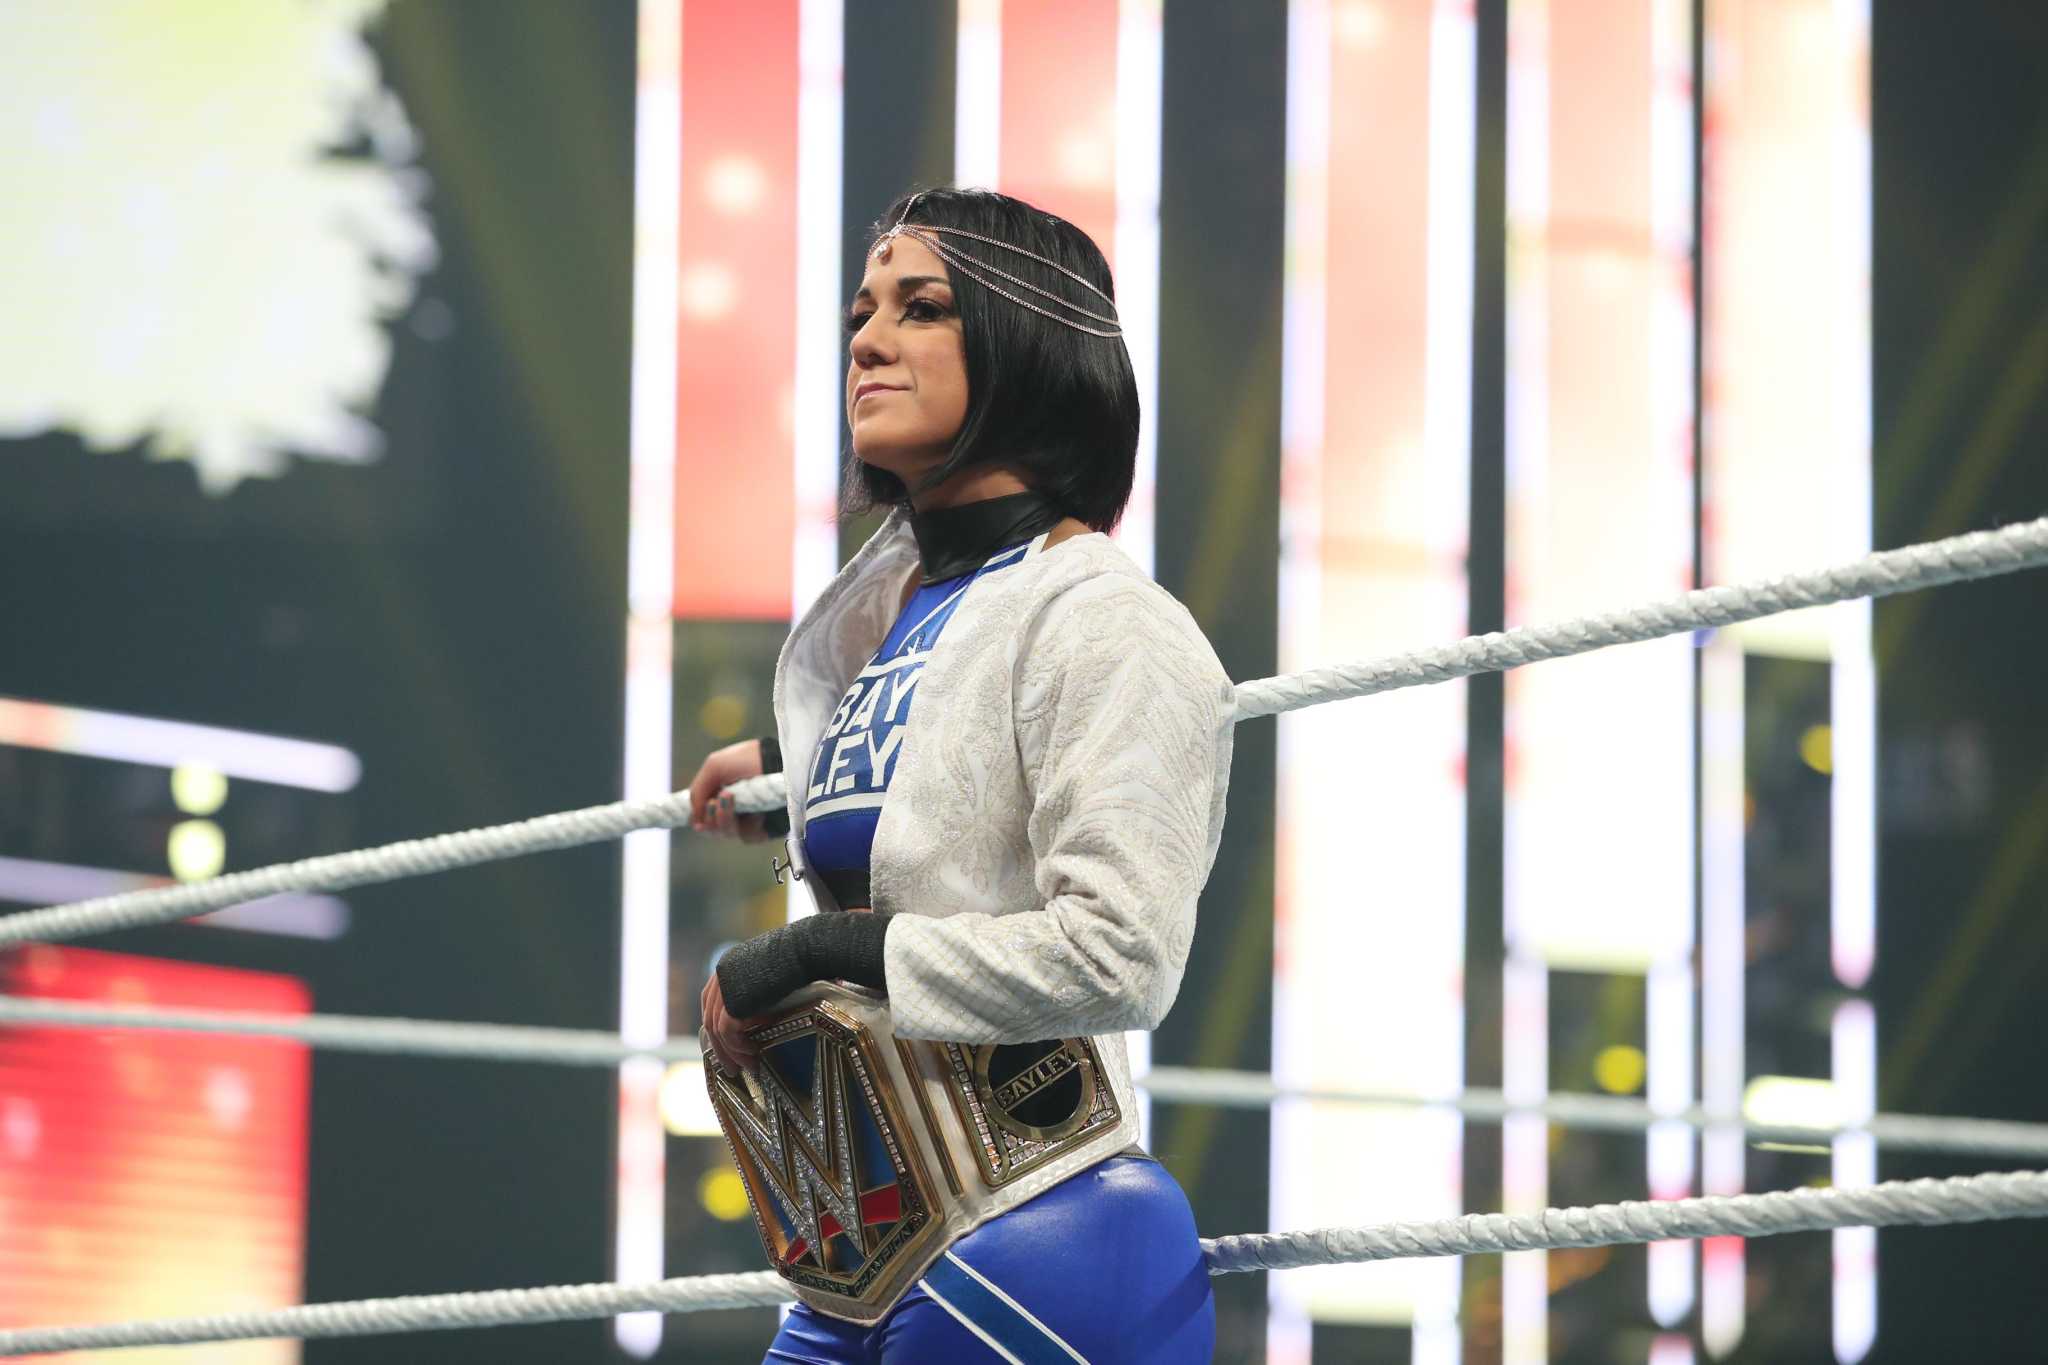 Wwes Bayley On Her New Look And Attitude Returning To Houston For The Royal Rumble And Her 7851